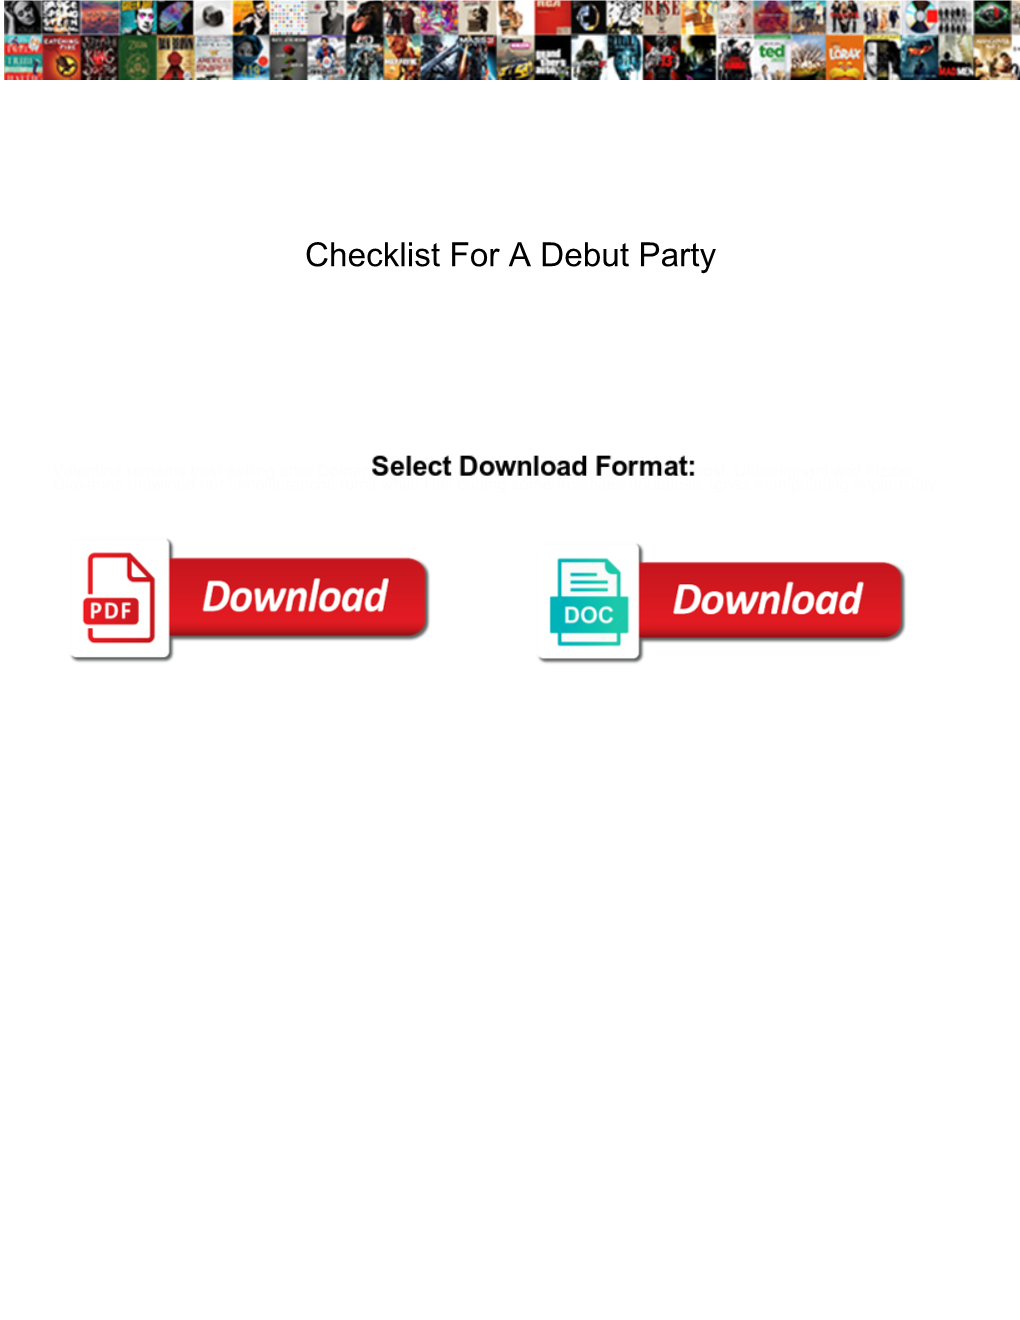 Checklist for a Debut Party